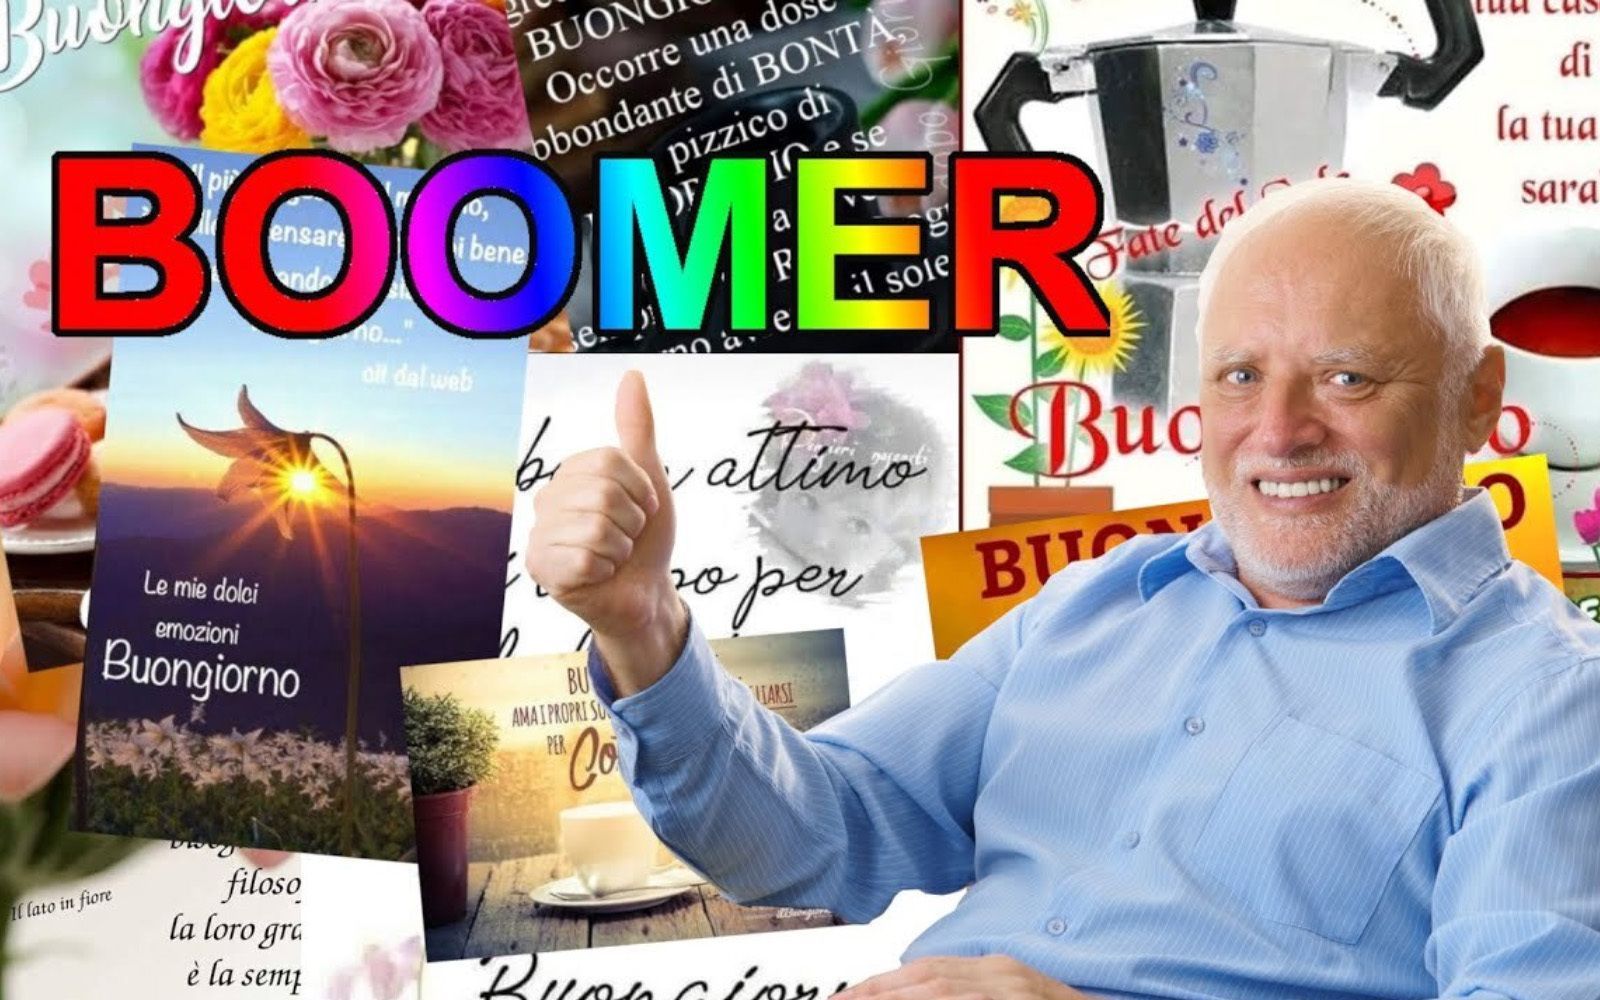 Has Instagram become a place for boomers?   Or we are the boomers?